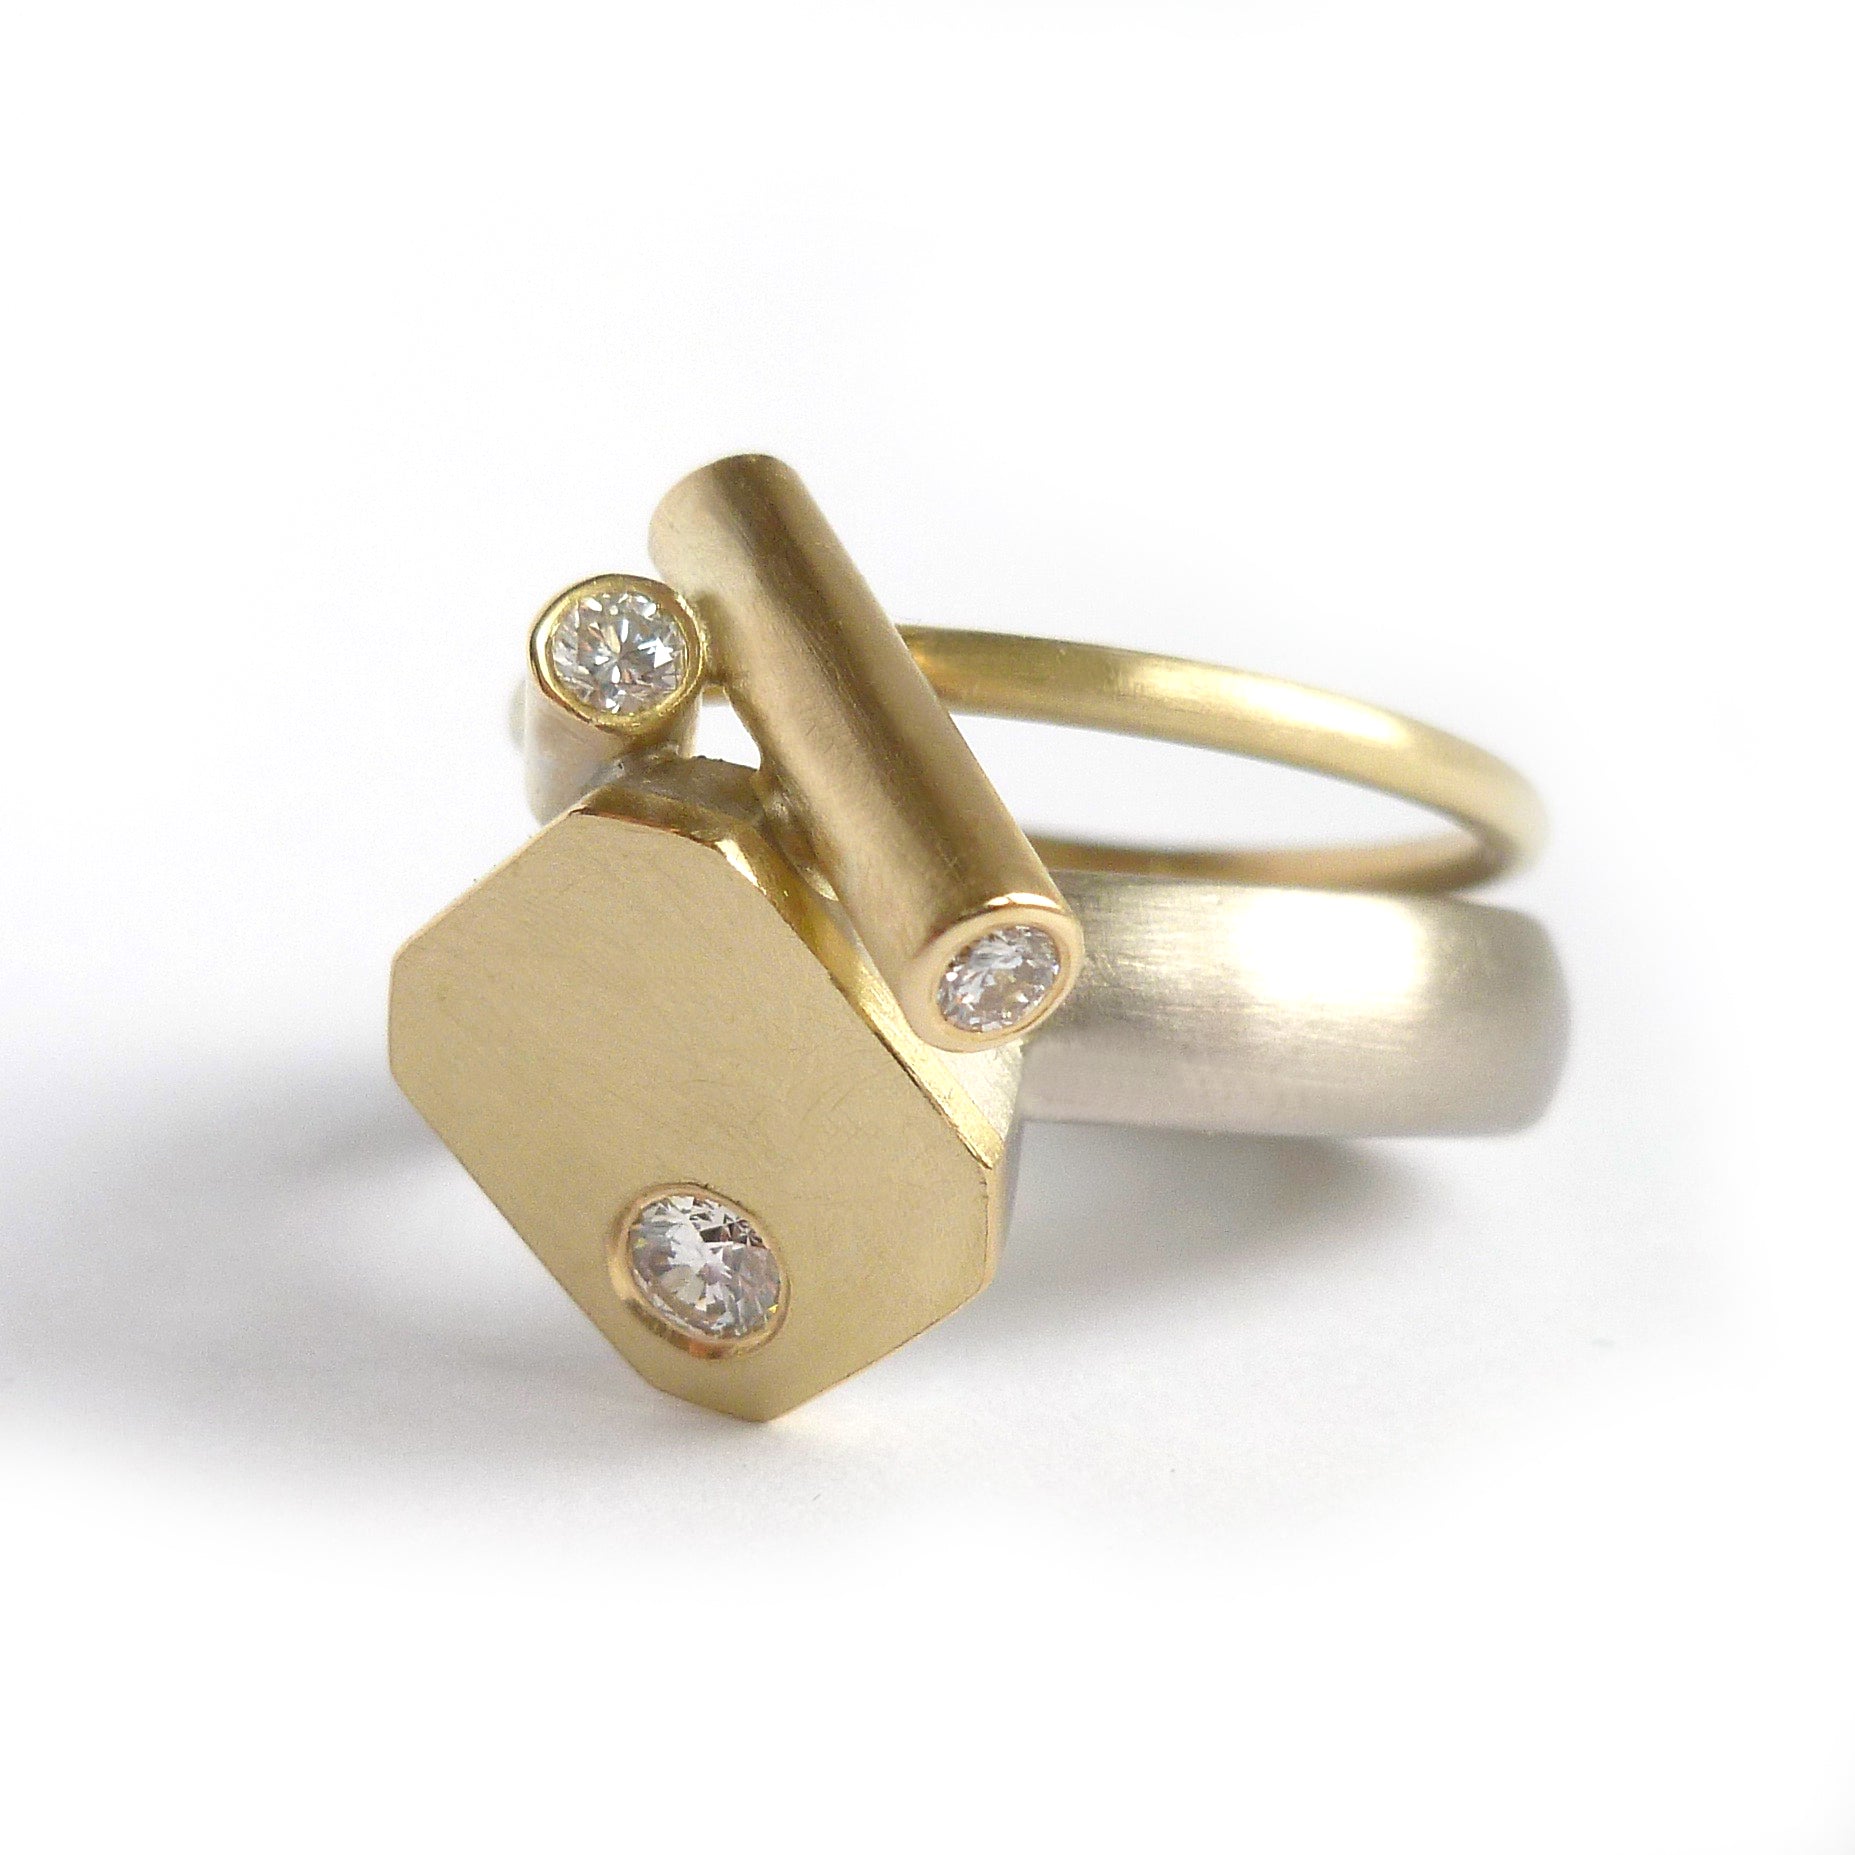 Contemporary chunky bold gold ring with diamonds handmade in UK by designer and make Sue Lane 